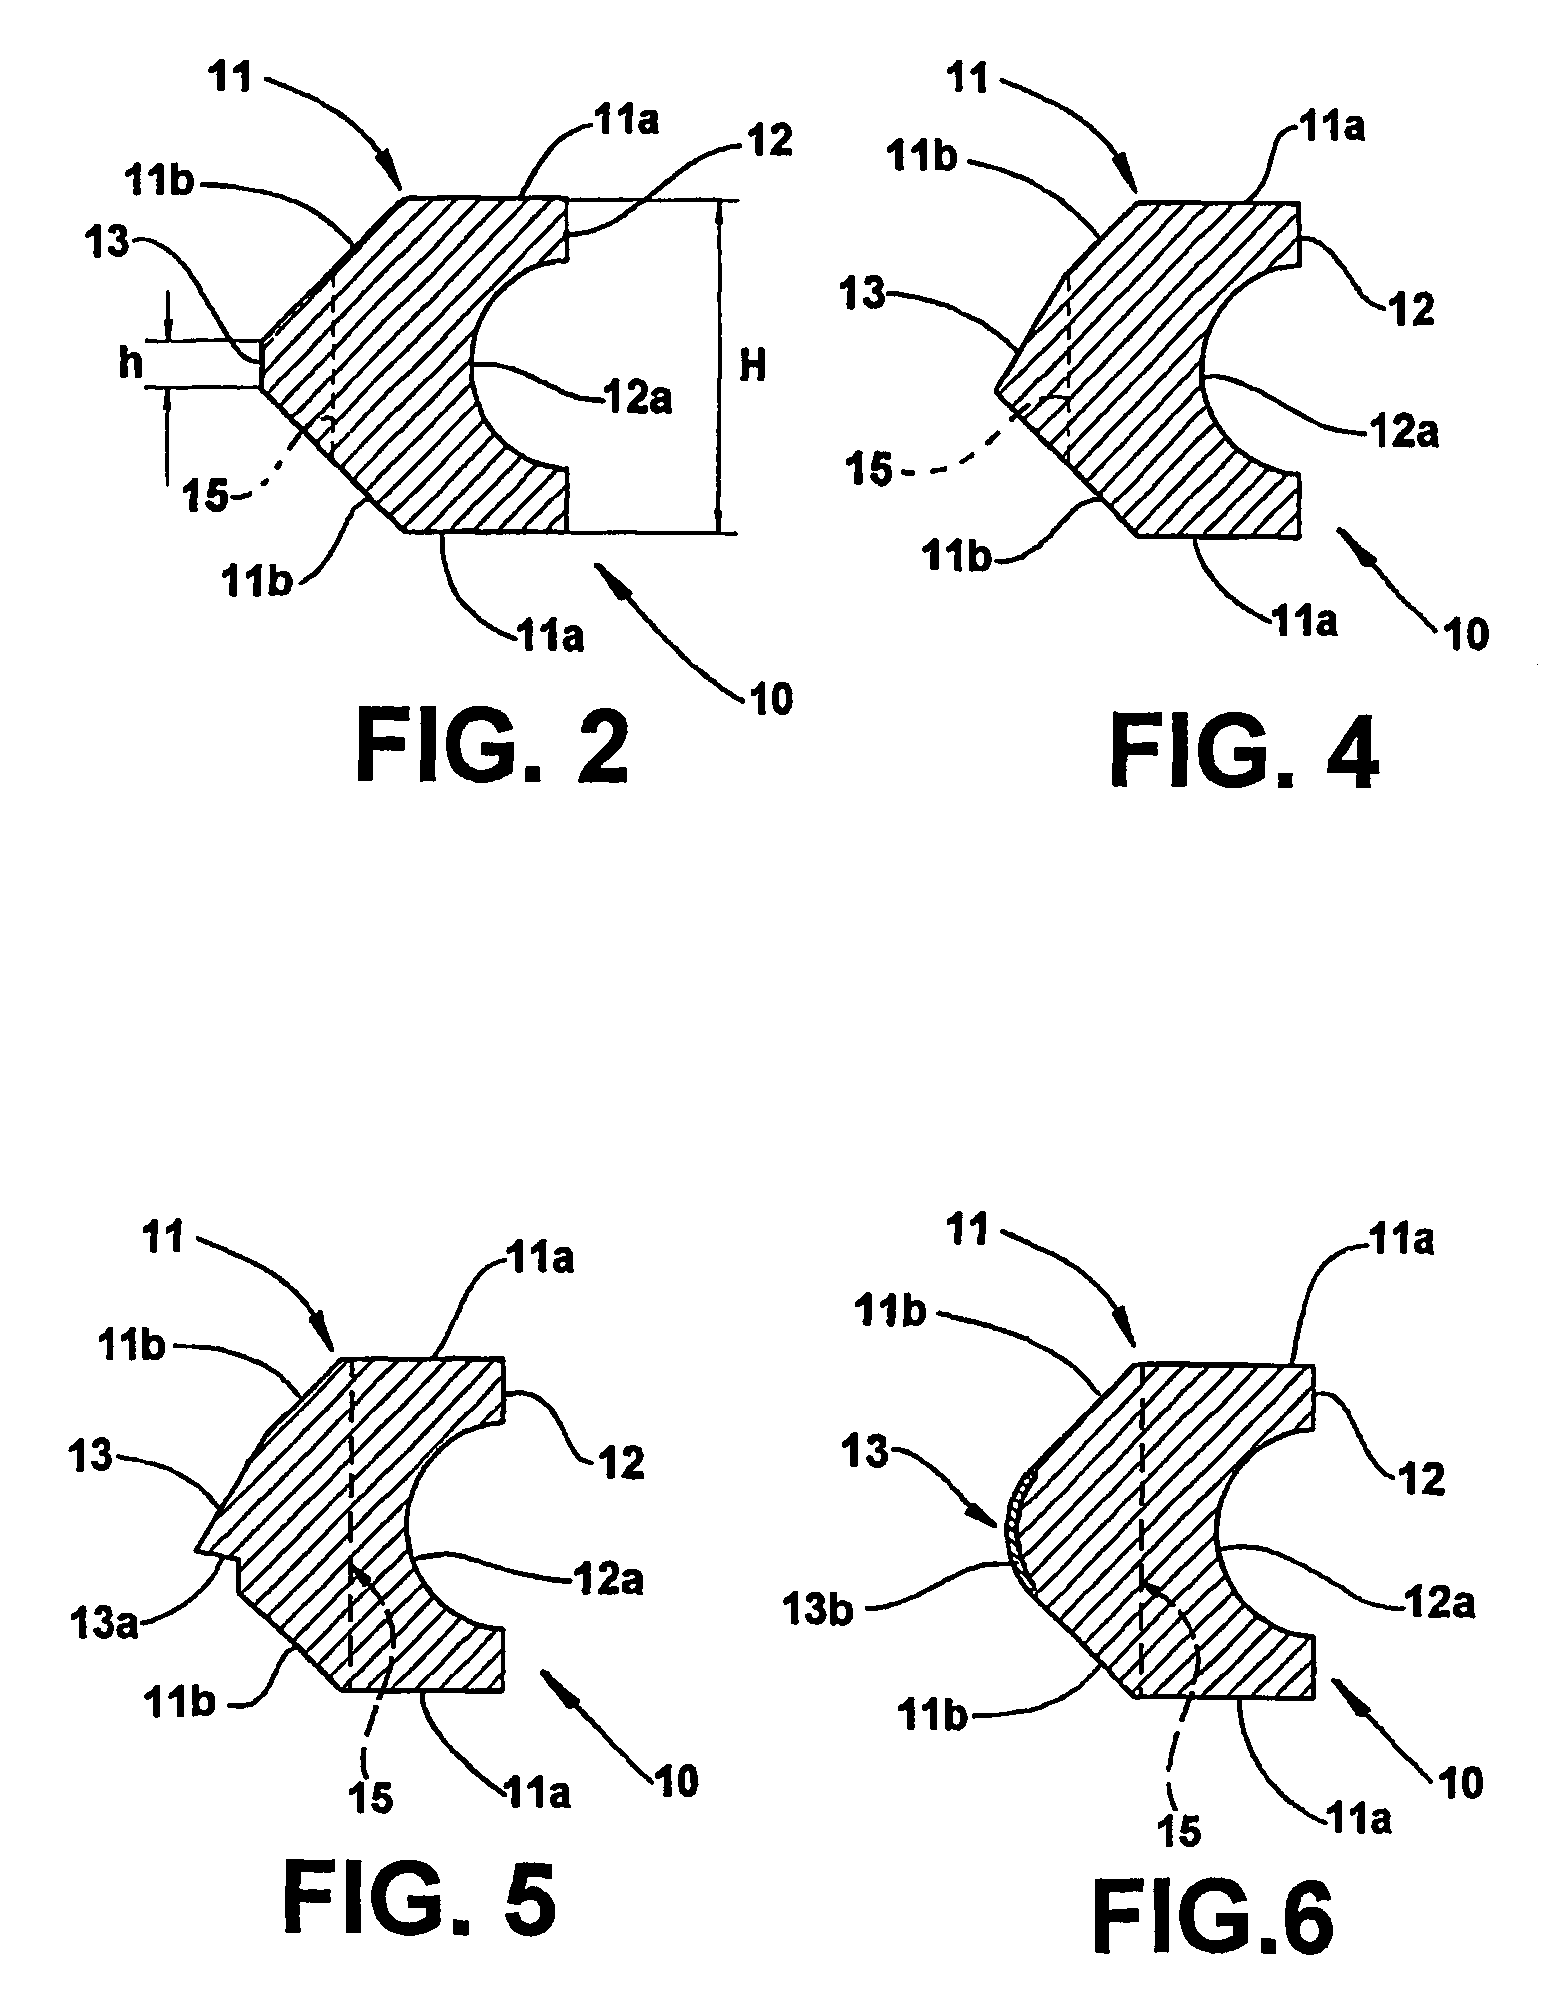 Oil ring for an internal combustion engine